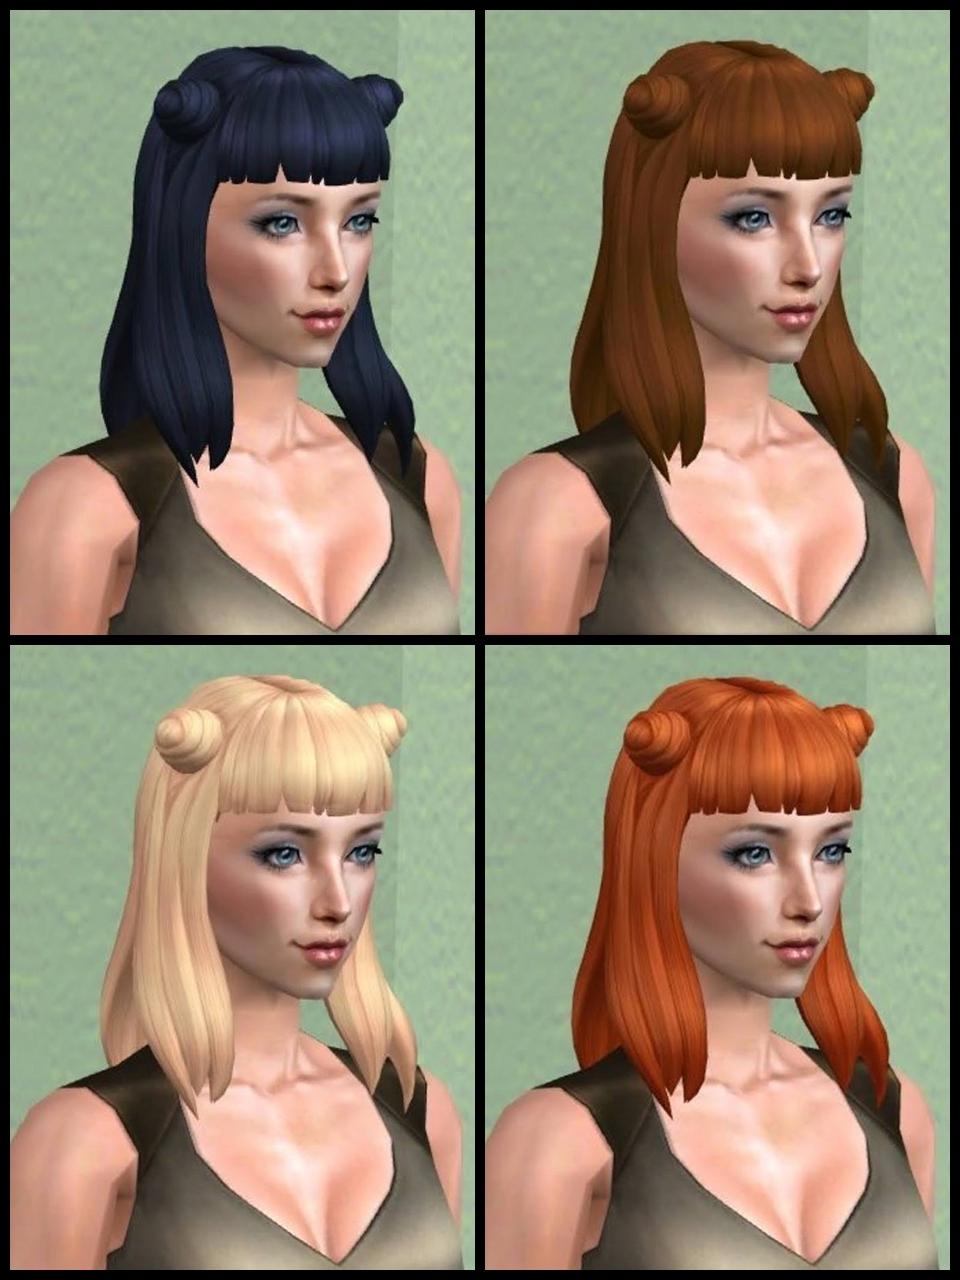 Ideas Hairstyles: sims 2 emo hairstyles